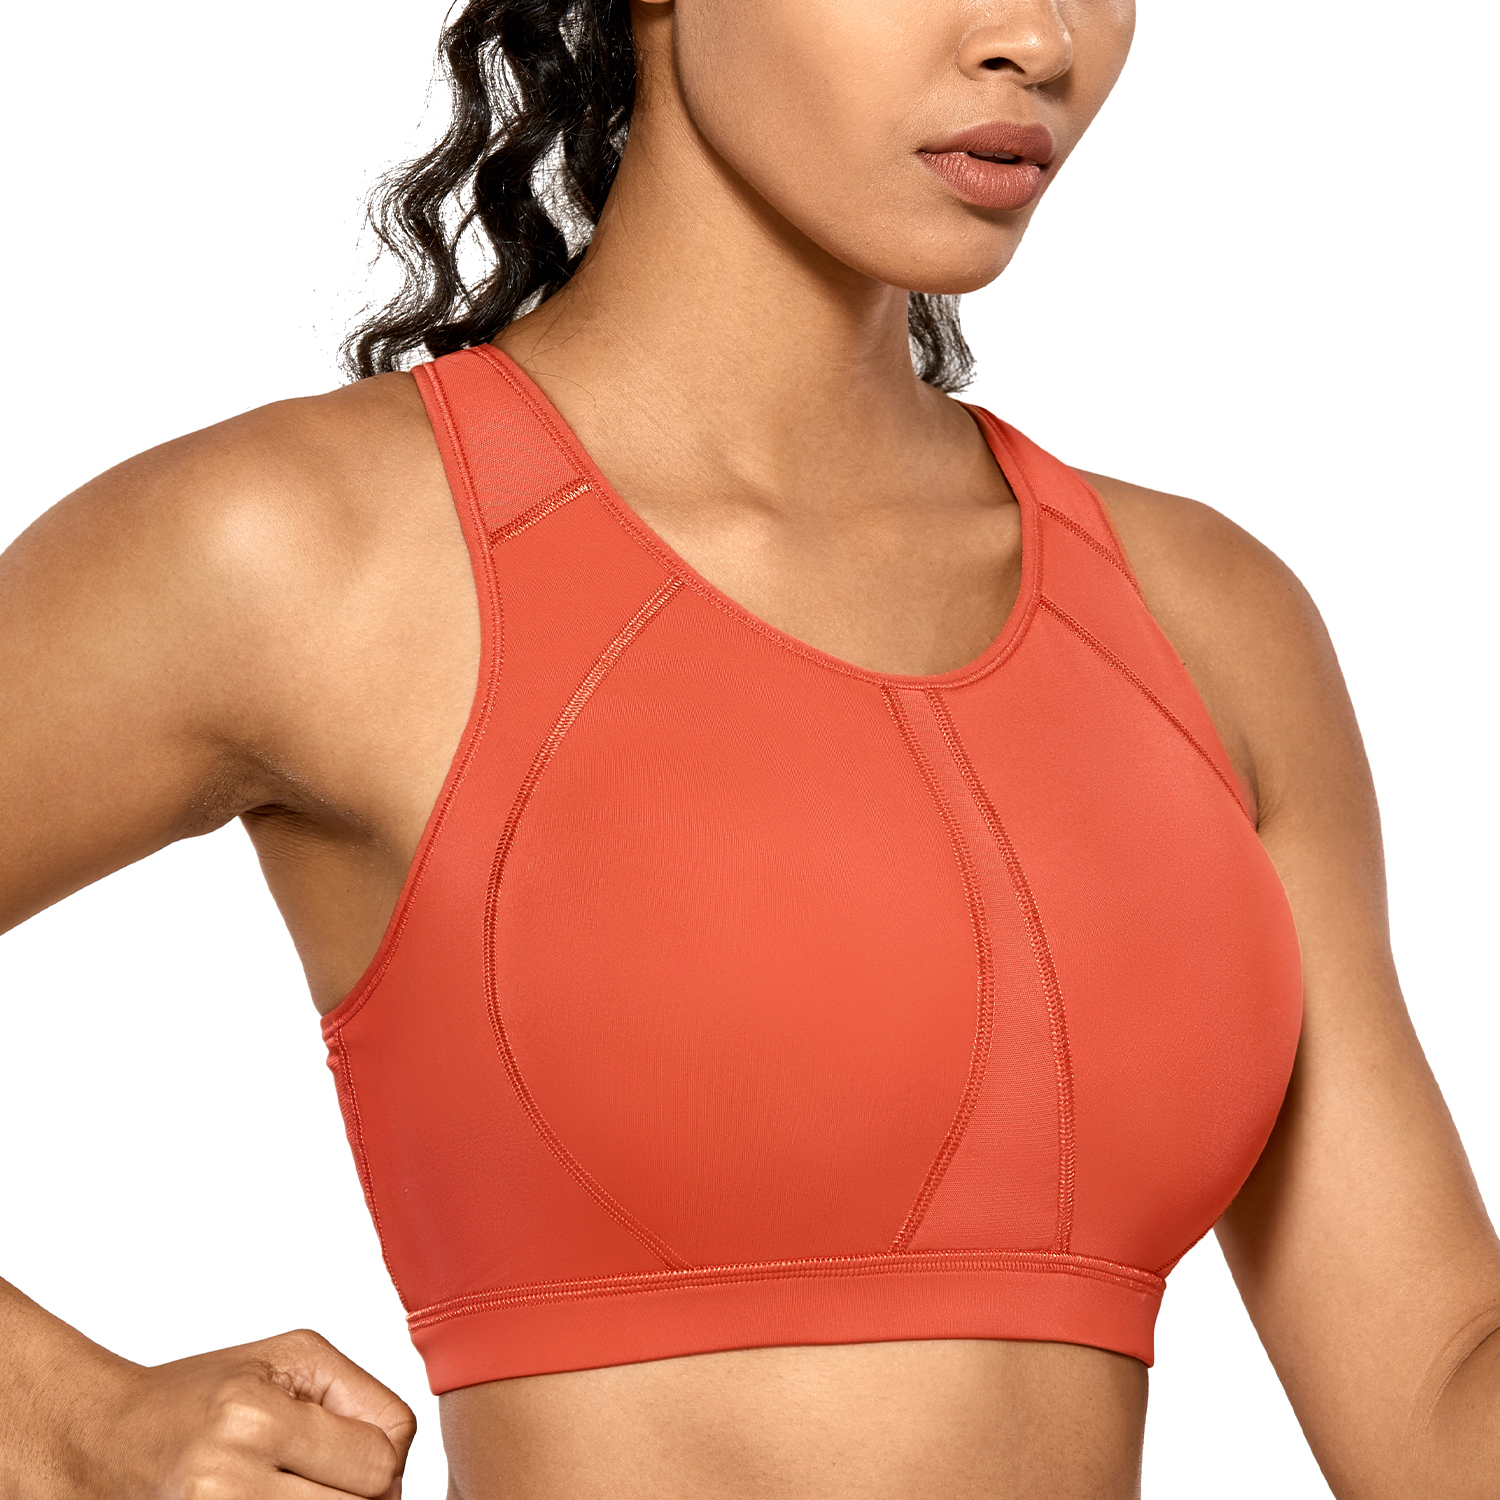 Women's High Impact Padded Supportive Wirefree Full Coverage Sports Bra BCDEFG